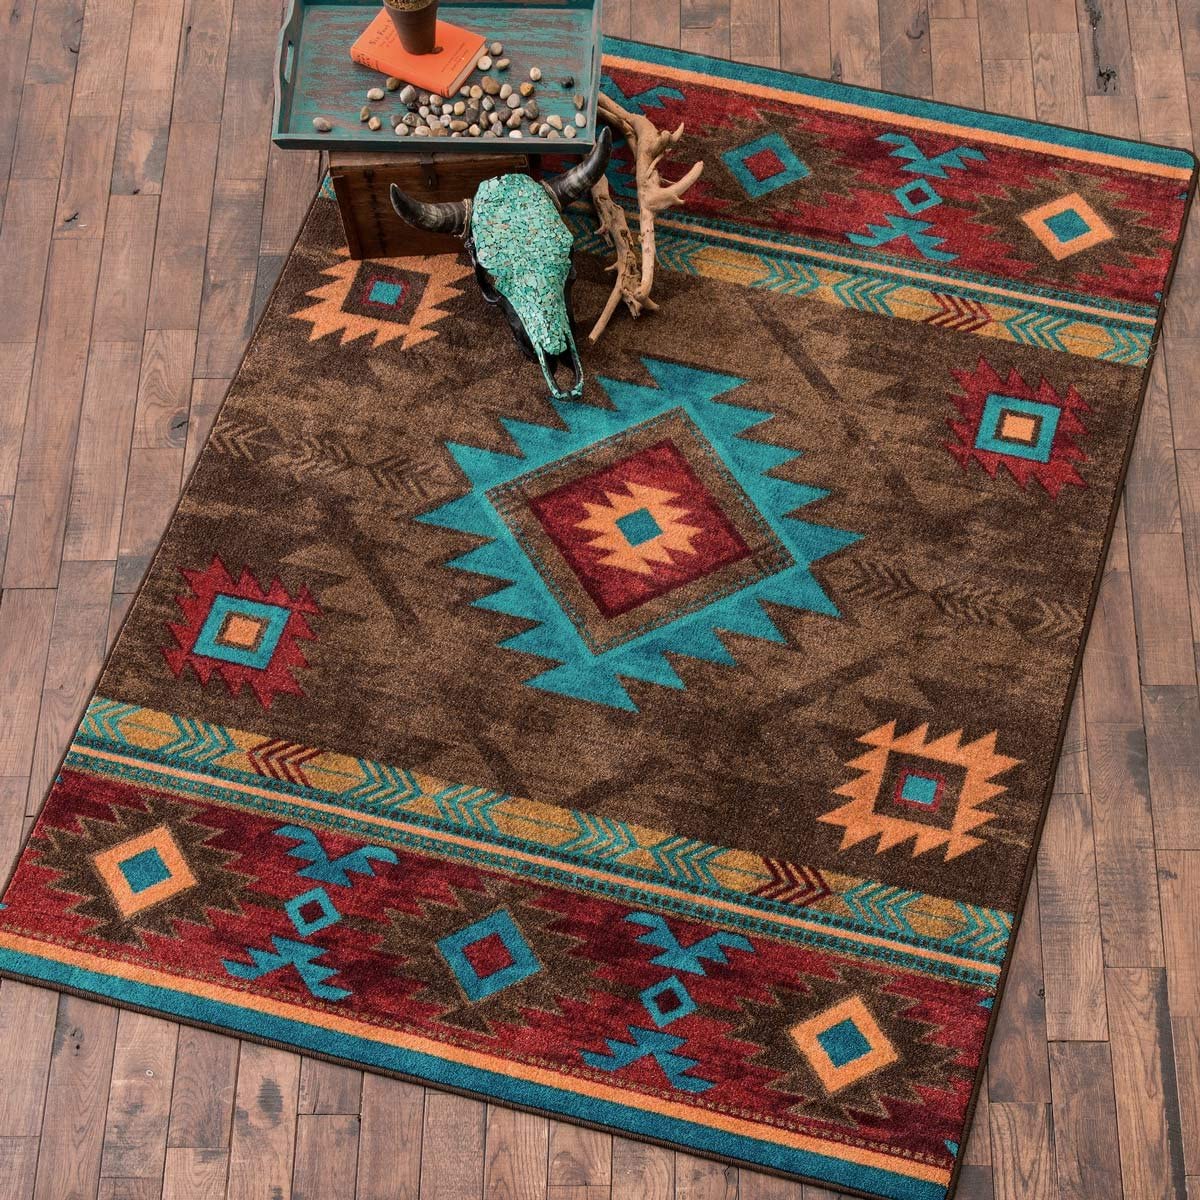 Turquoise and brown floor rug